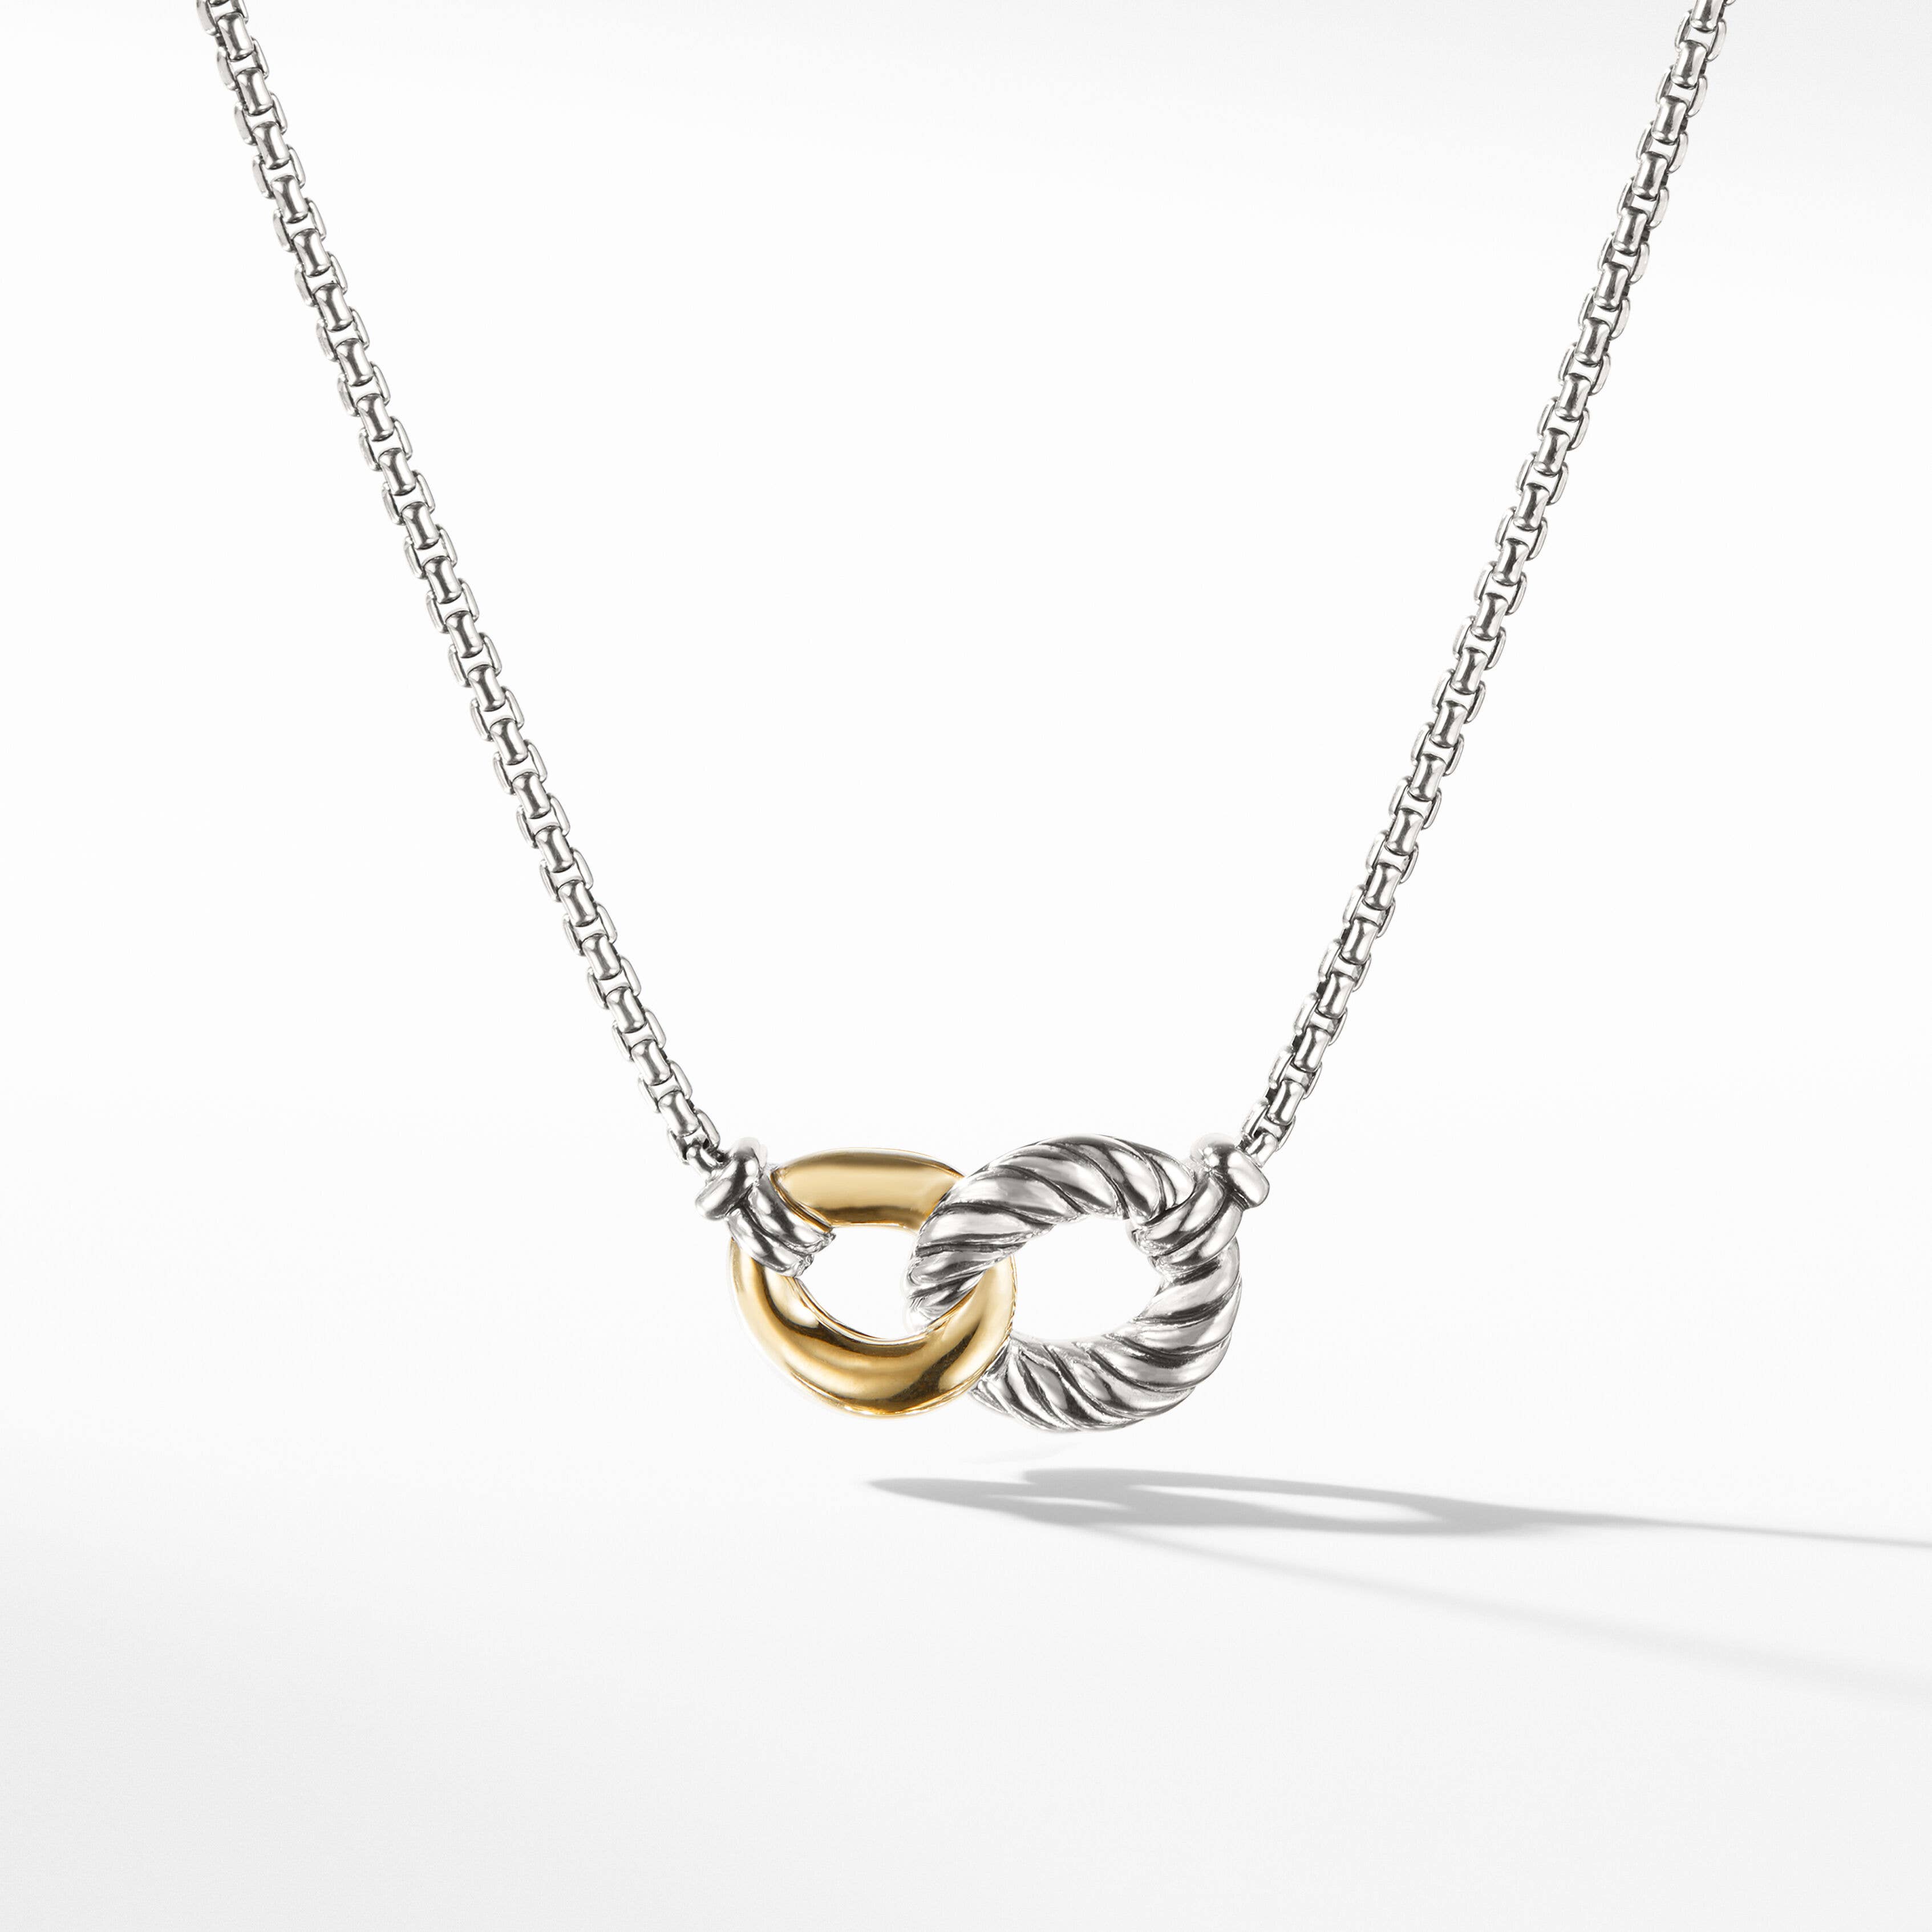 Belmont® Curb Link Necklace with 18K Yellow Gold